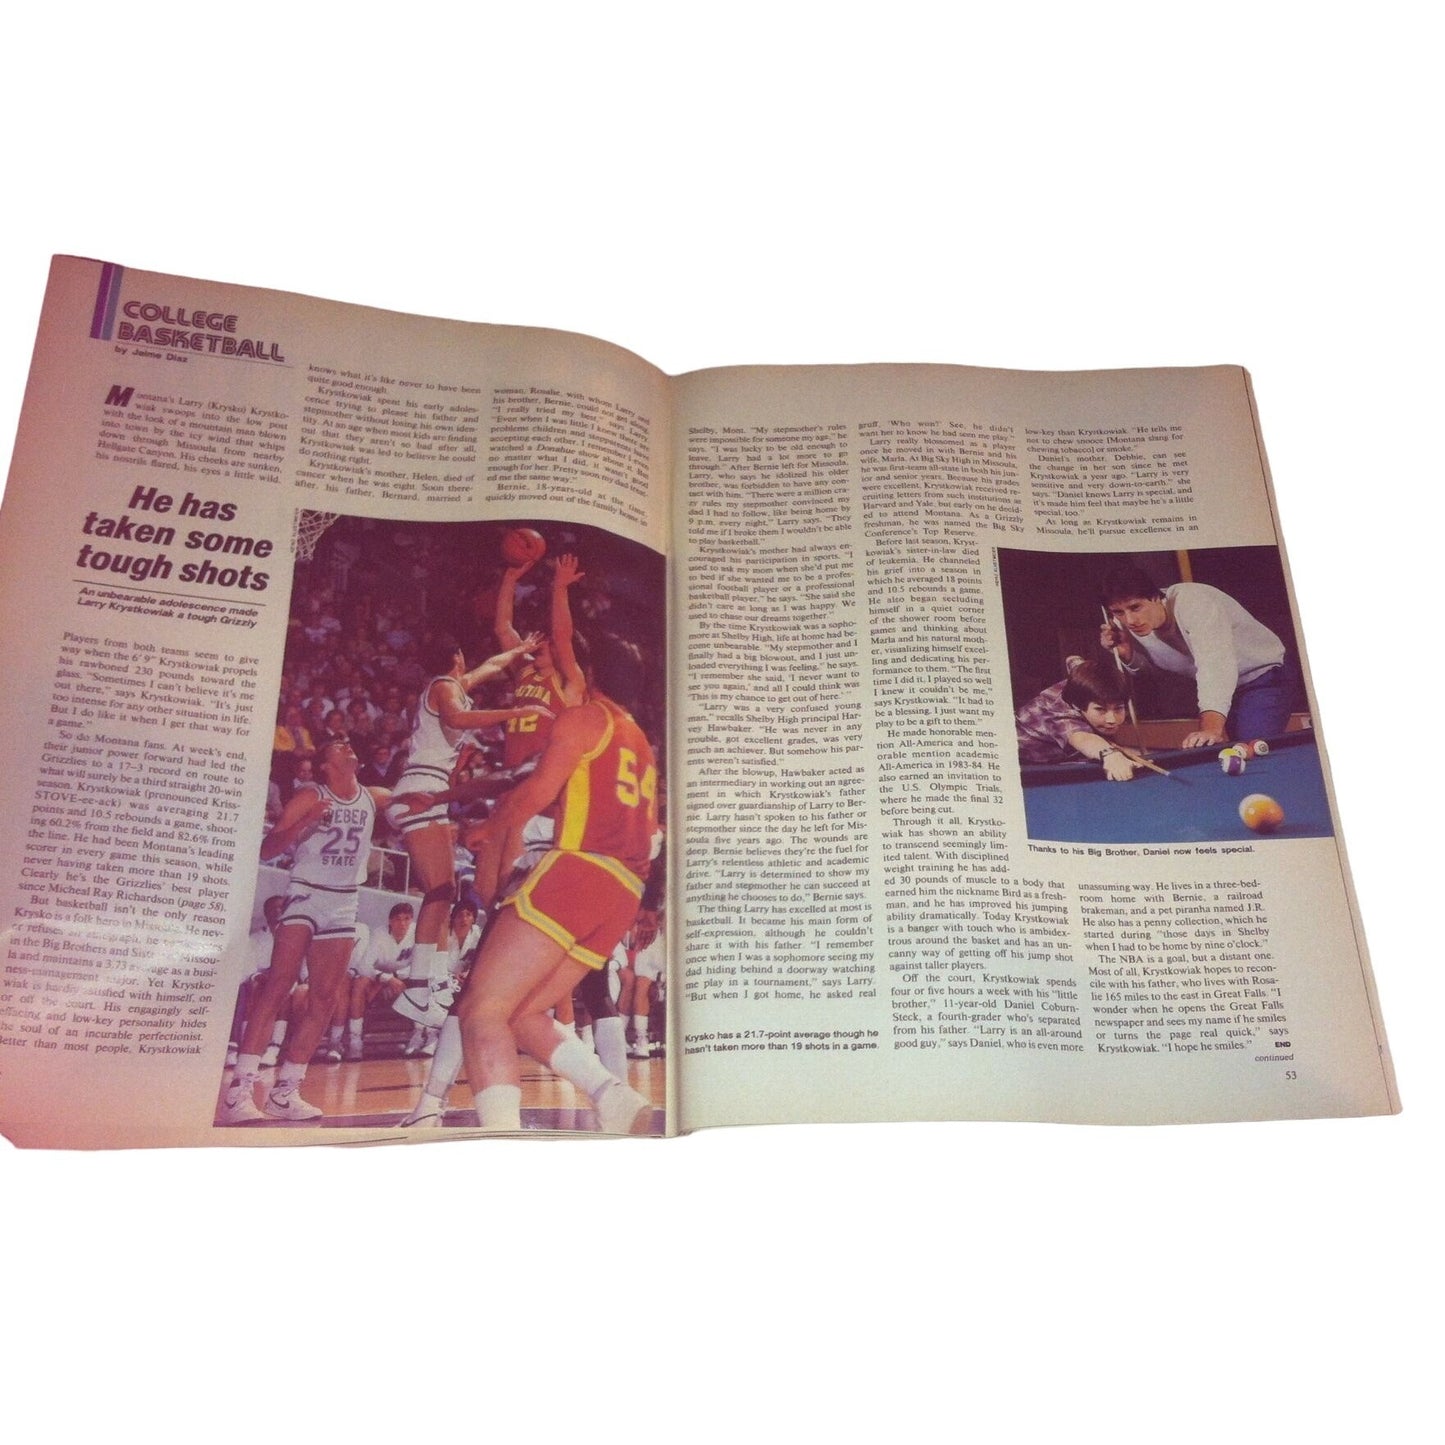 Vintage Sports Illustrated Magazine February 4, 1985 Down Goes Georgetown